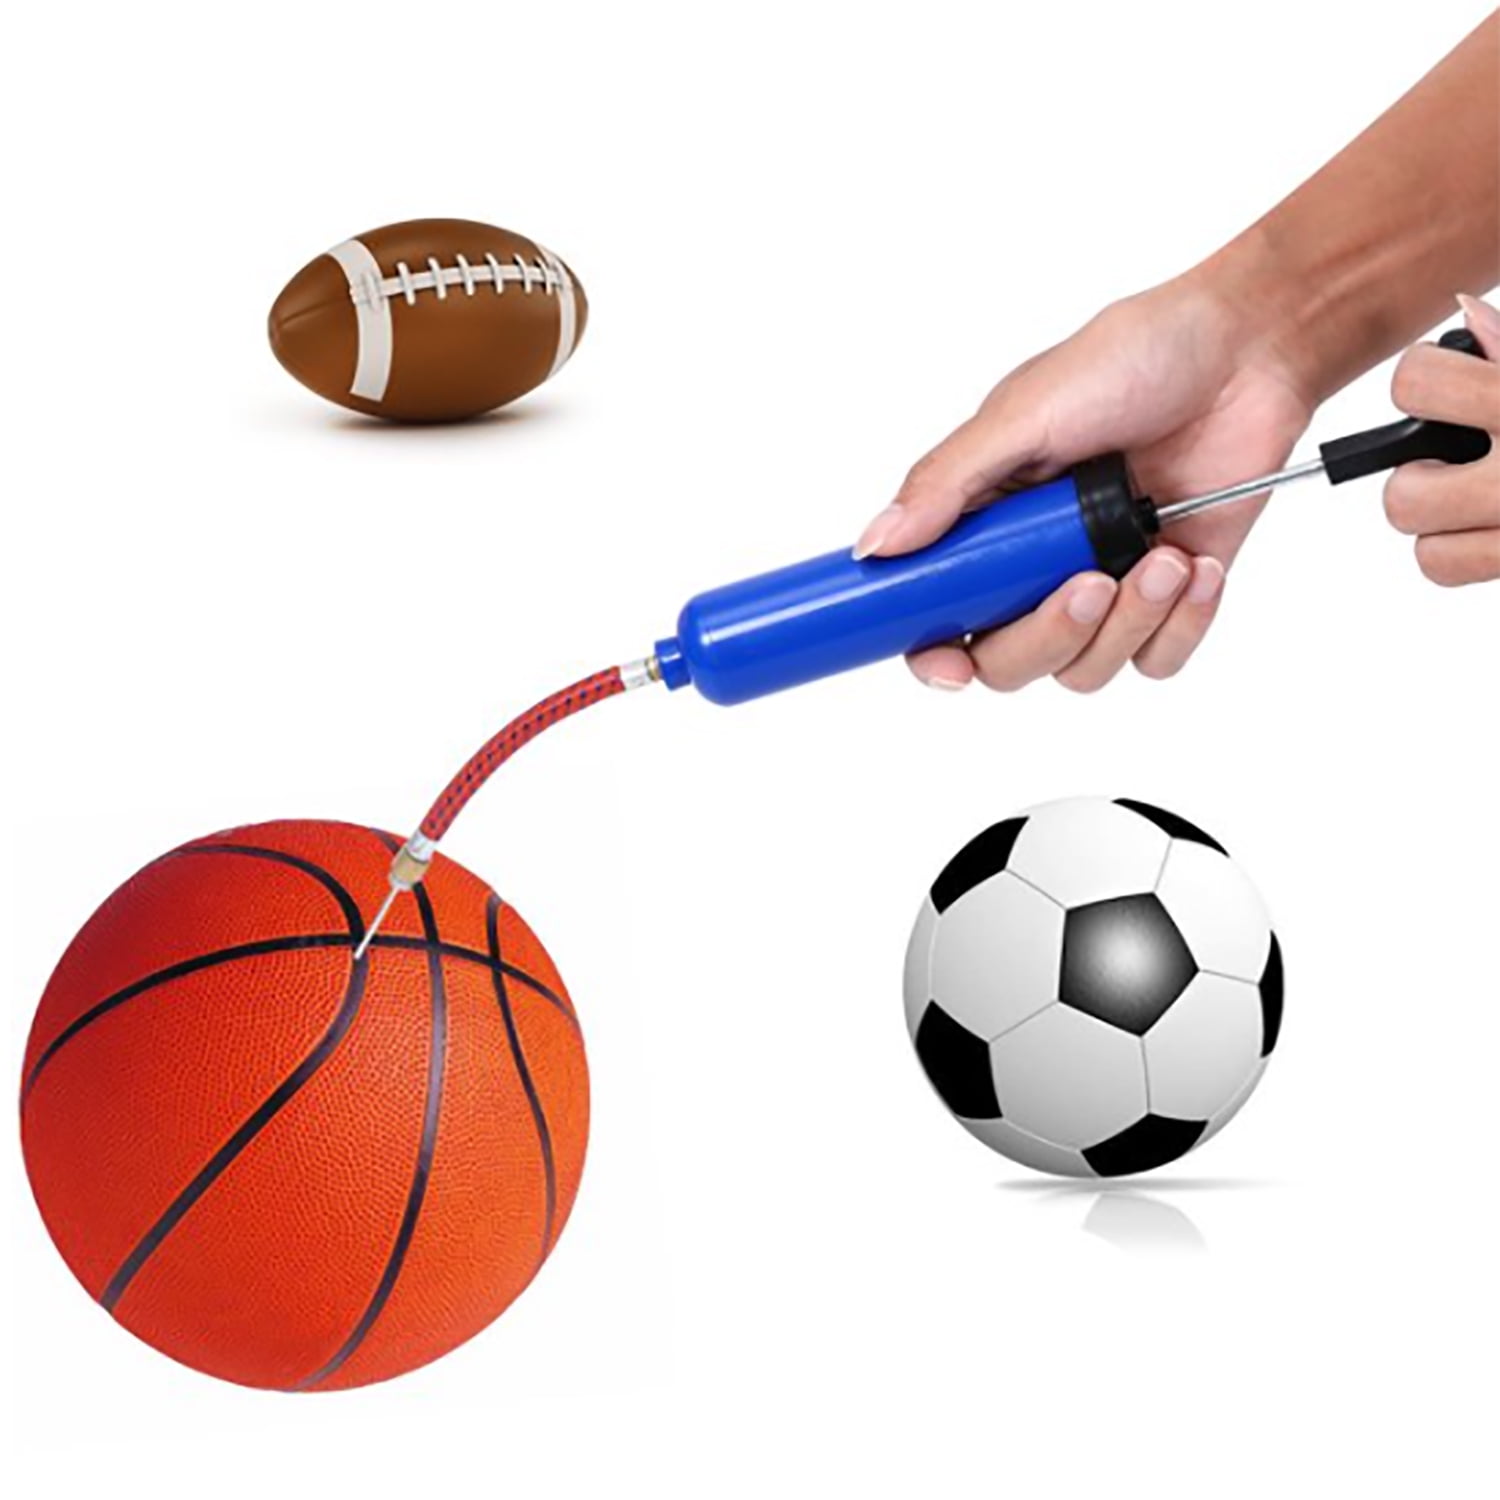 Basketball Accurate Inflation Swim Ring Inflatable Toys Football Balloon Pro Sports Ball Tool Ball Pump Air Pump with Inflation Needle Nozzles and Rubber Hose 